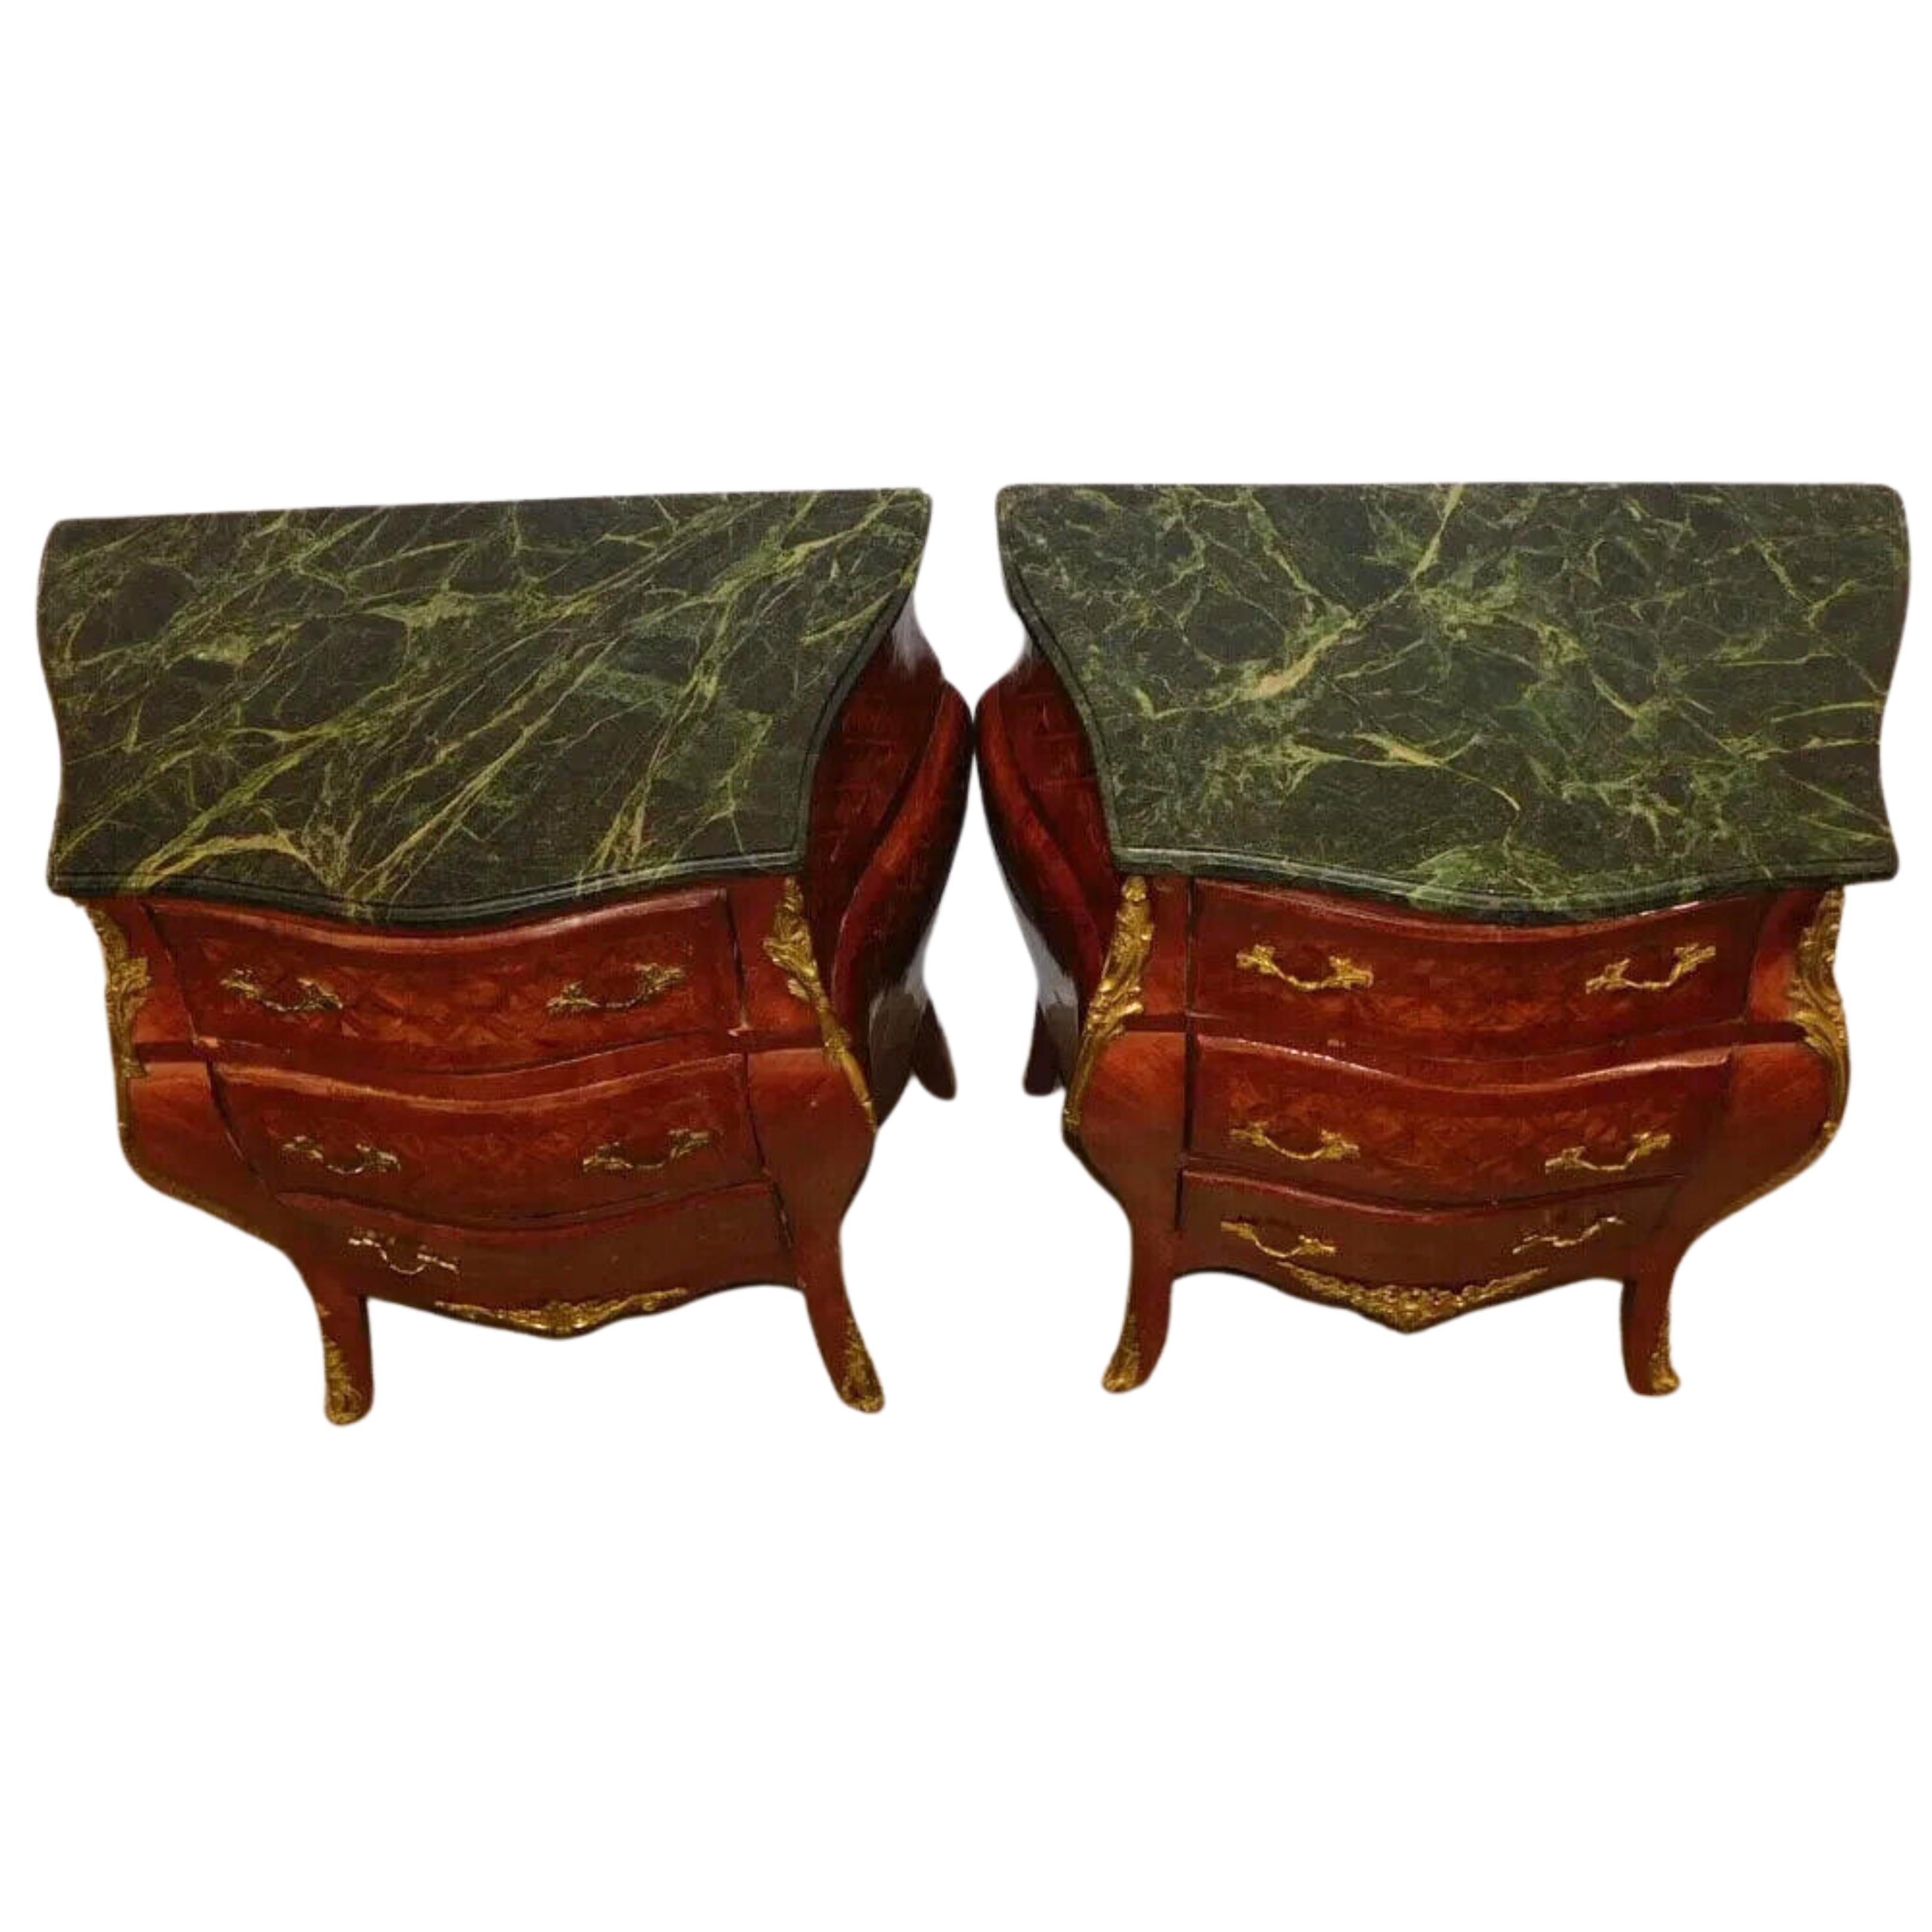 20th C. Walnut Inlay, Marble Top, Diminutive, With Bronze Commodes, Set of Two! 5